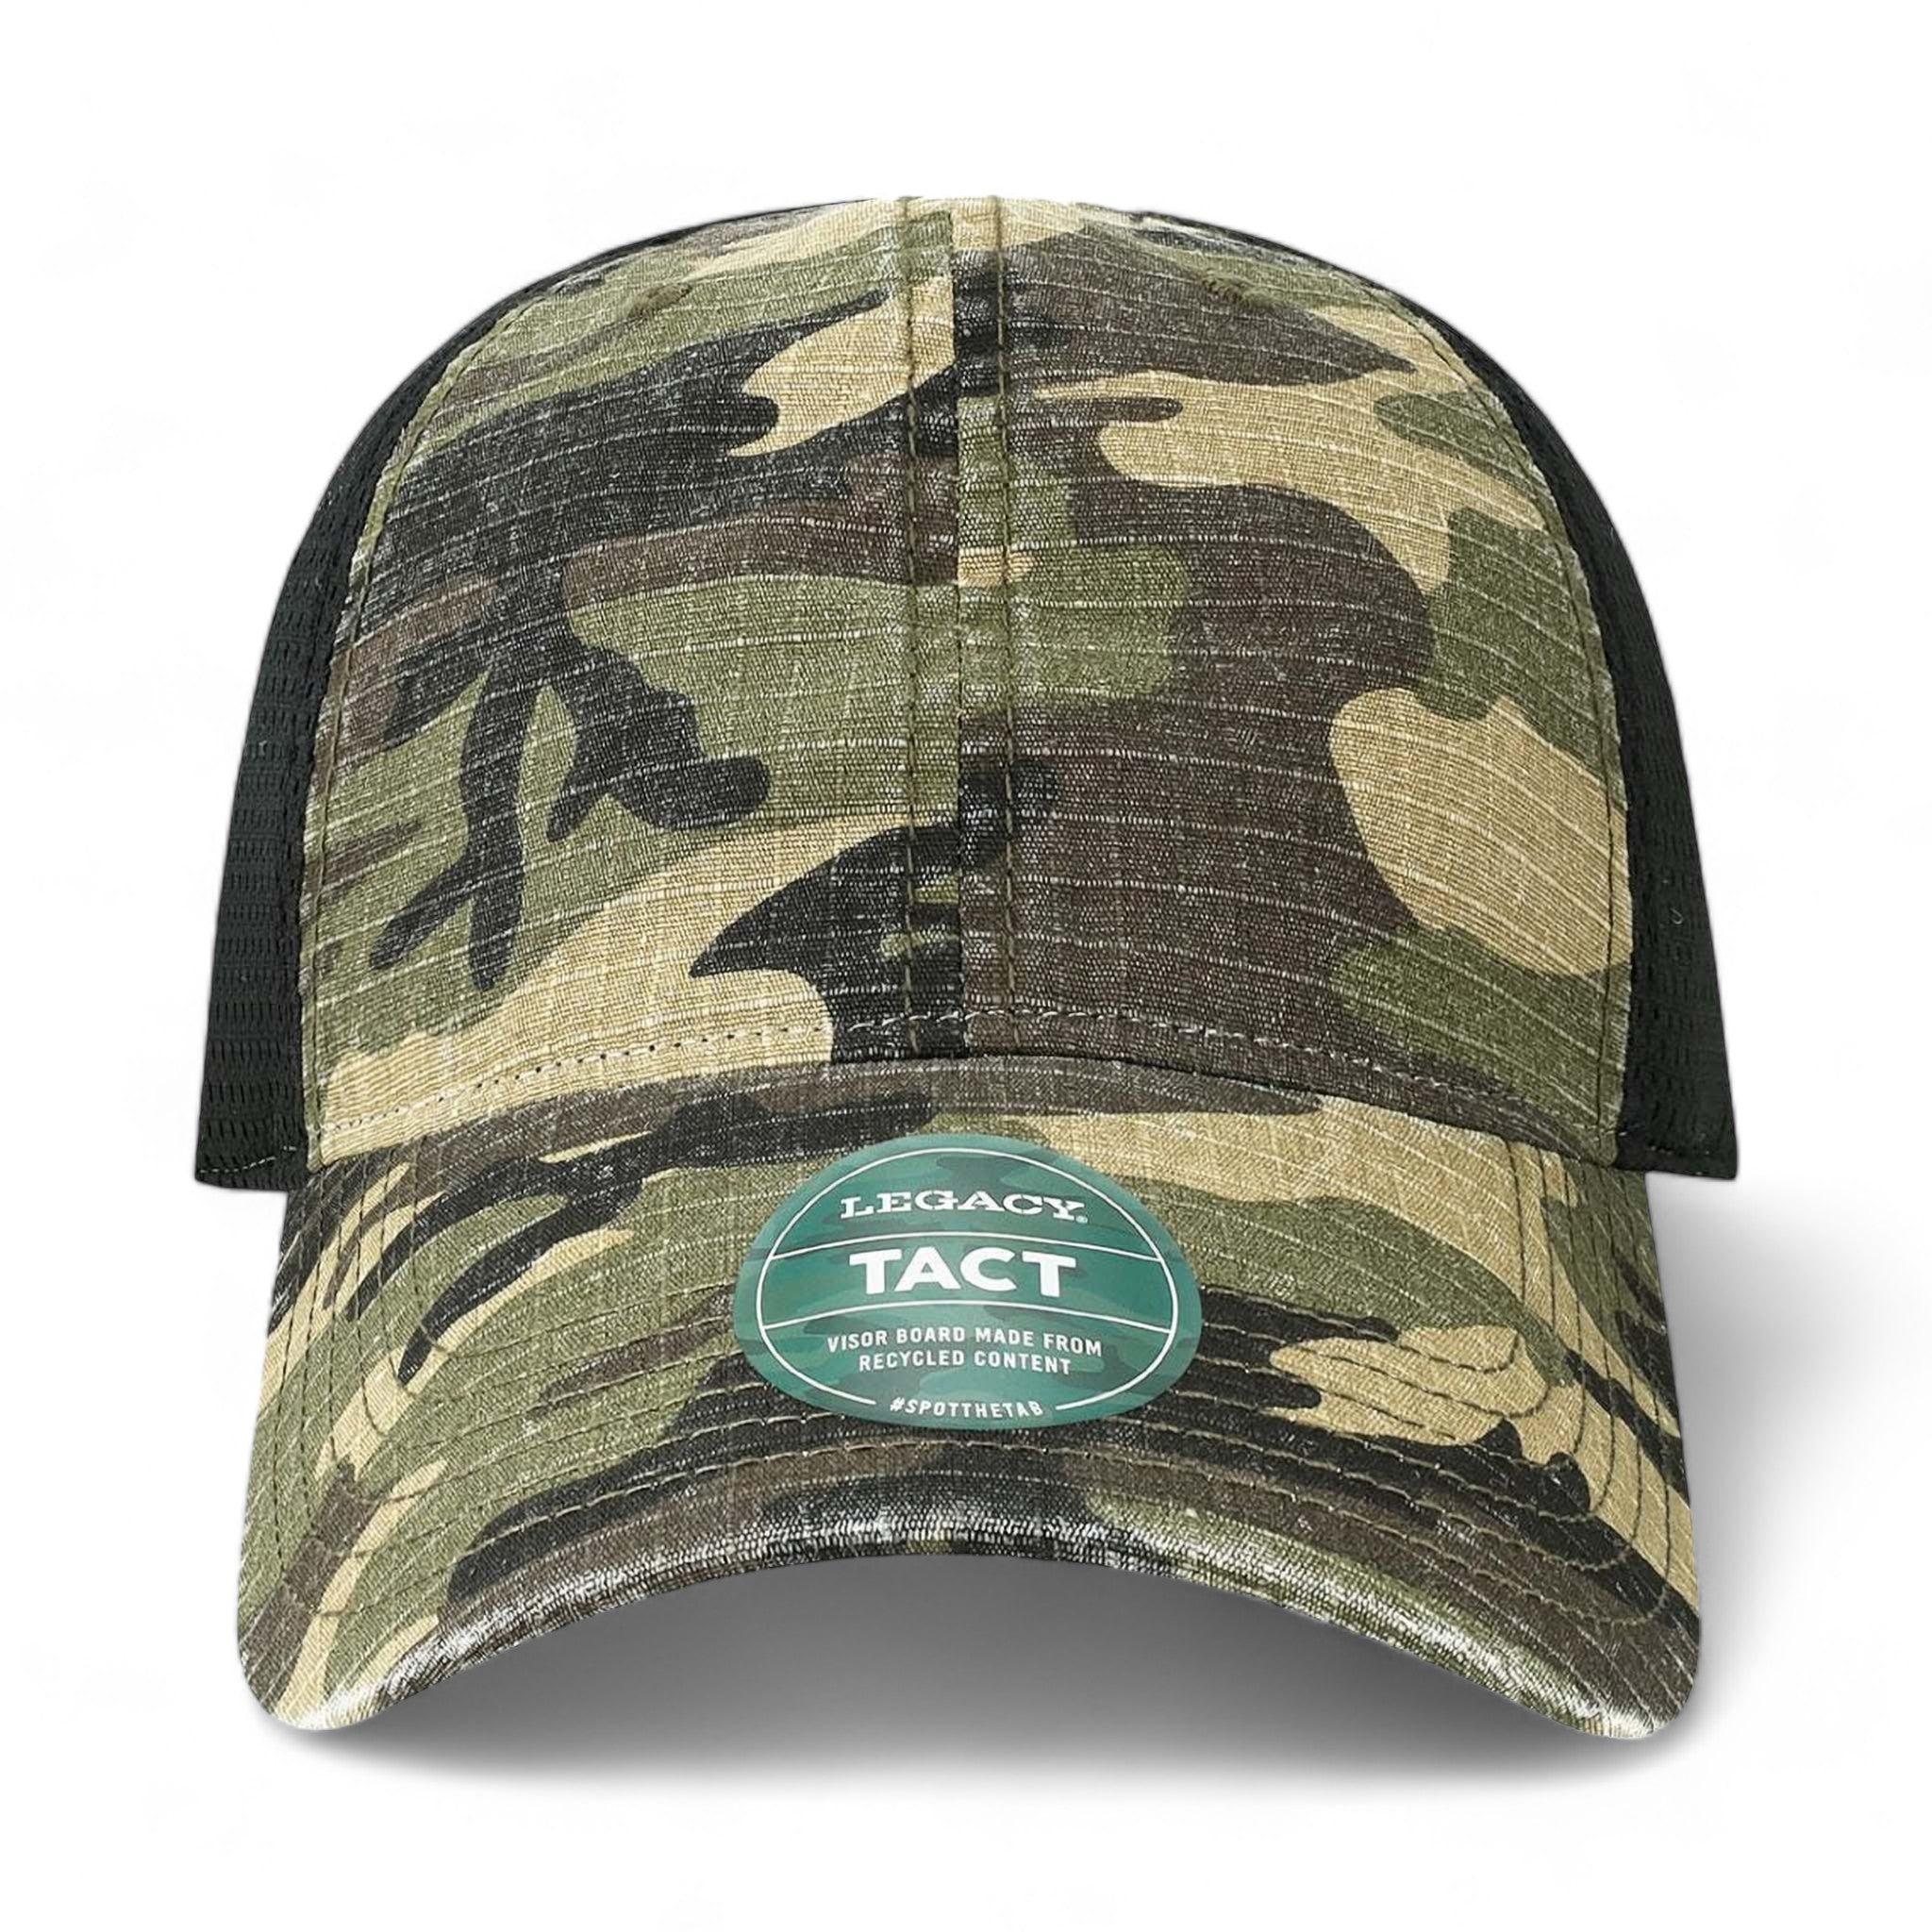 Front view of LEGACY TACT custom hat in army camo and black